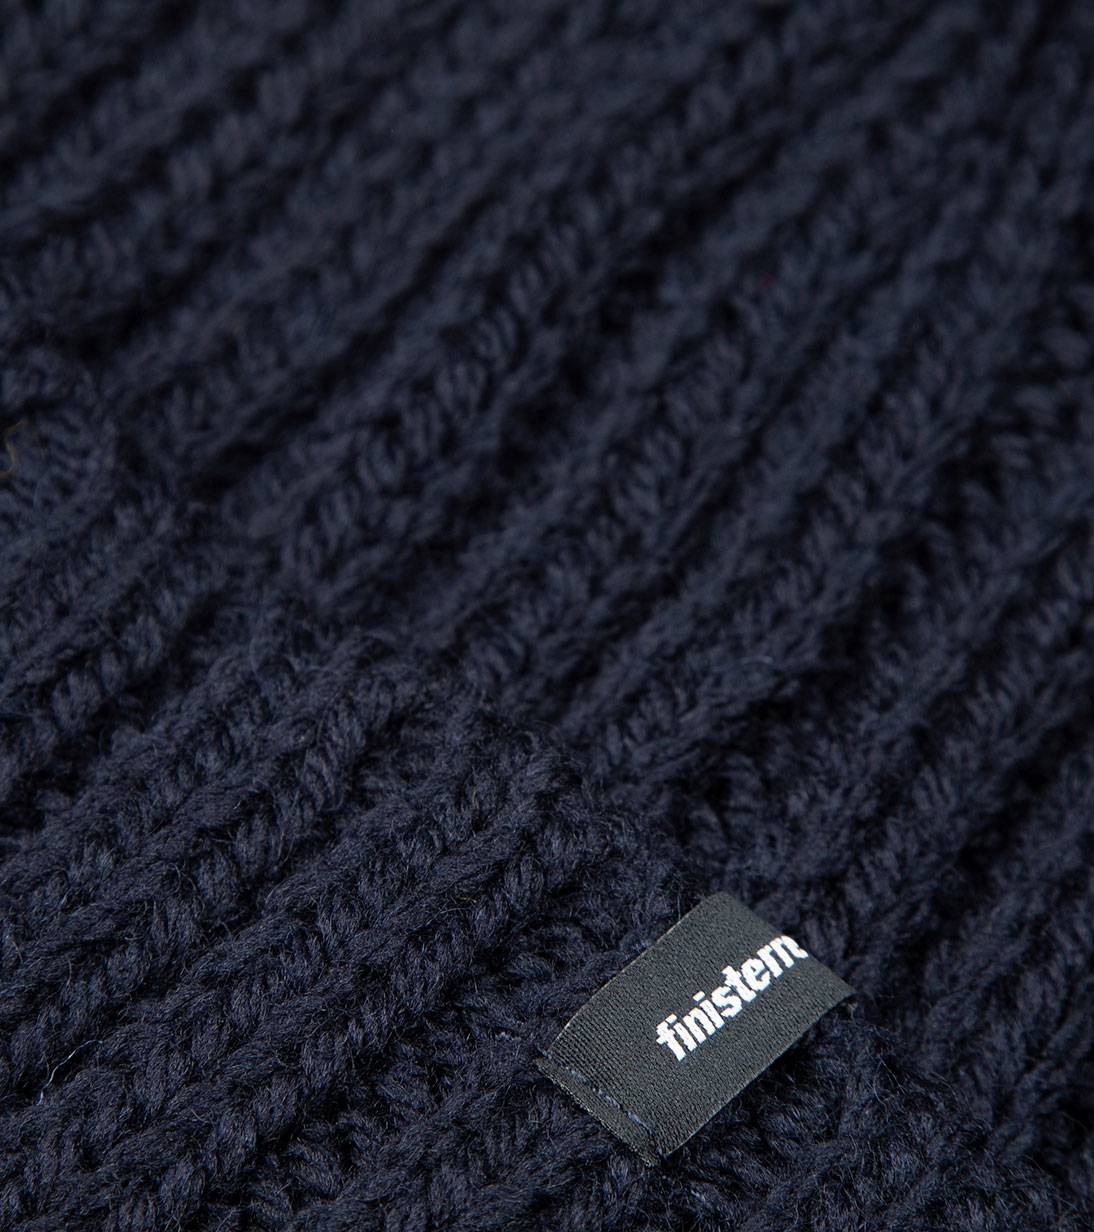 Made from: Merino, Cotton blend